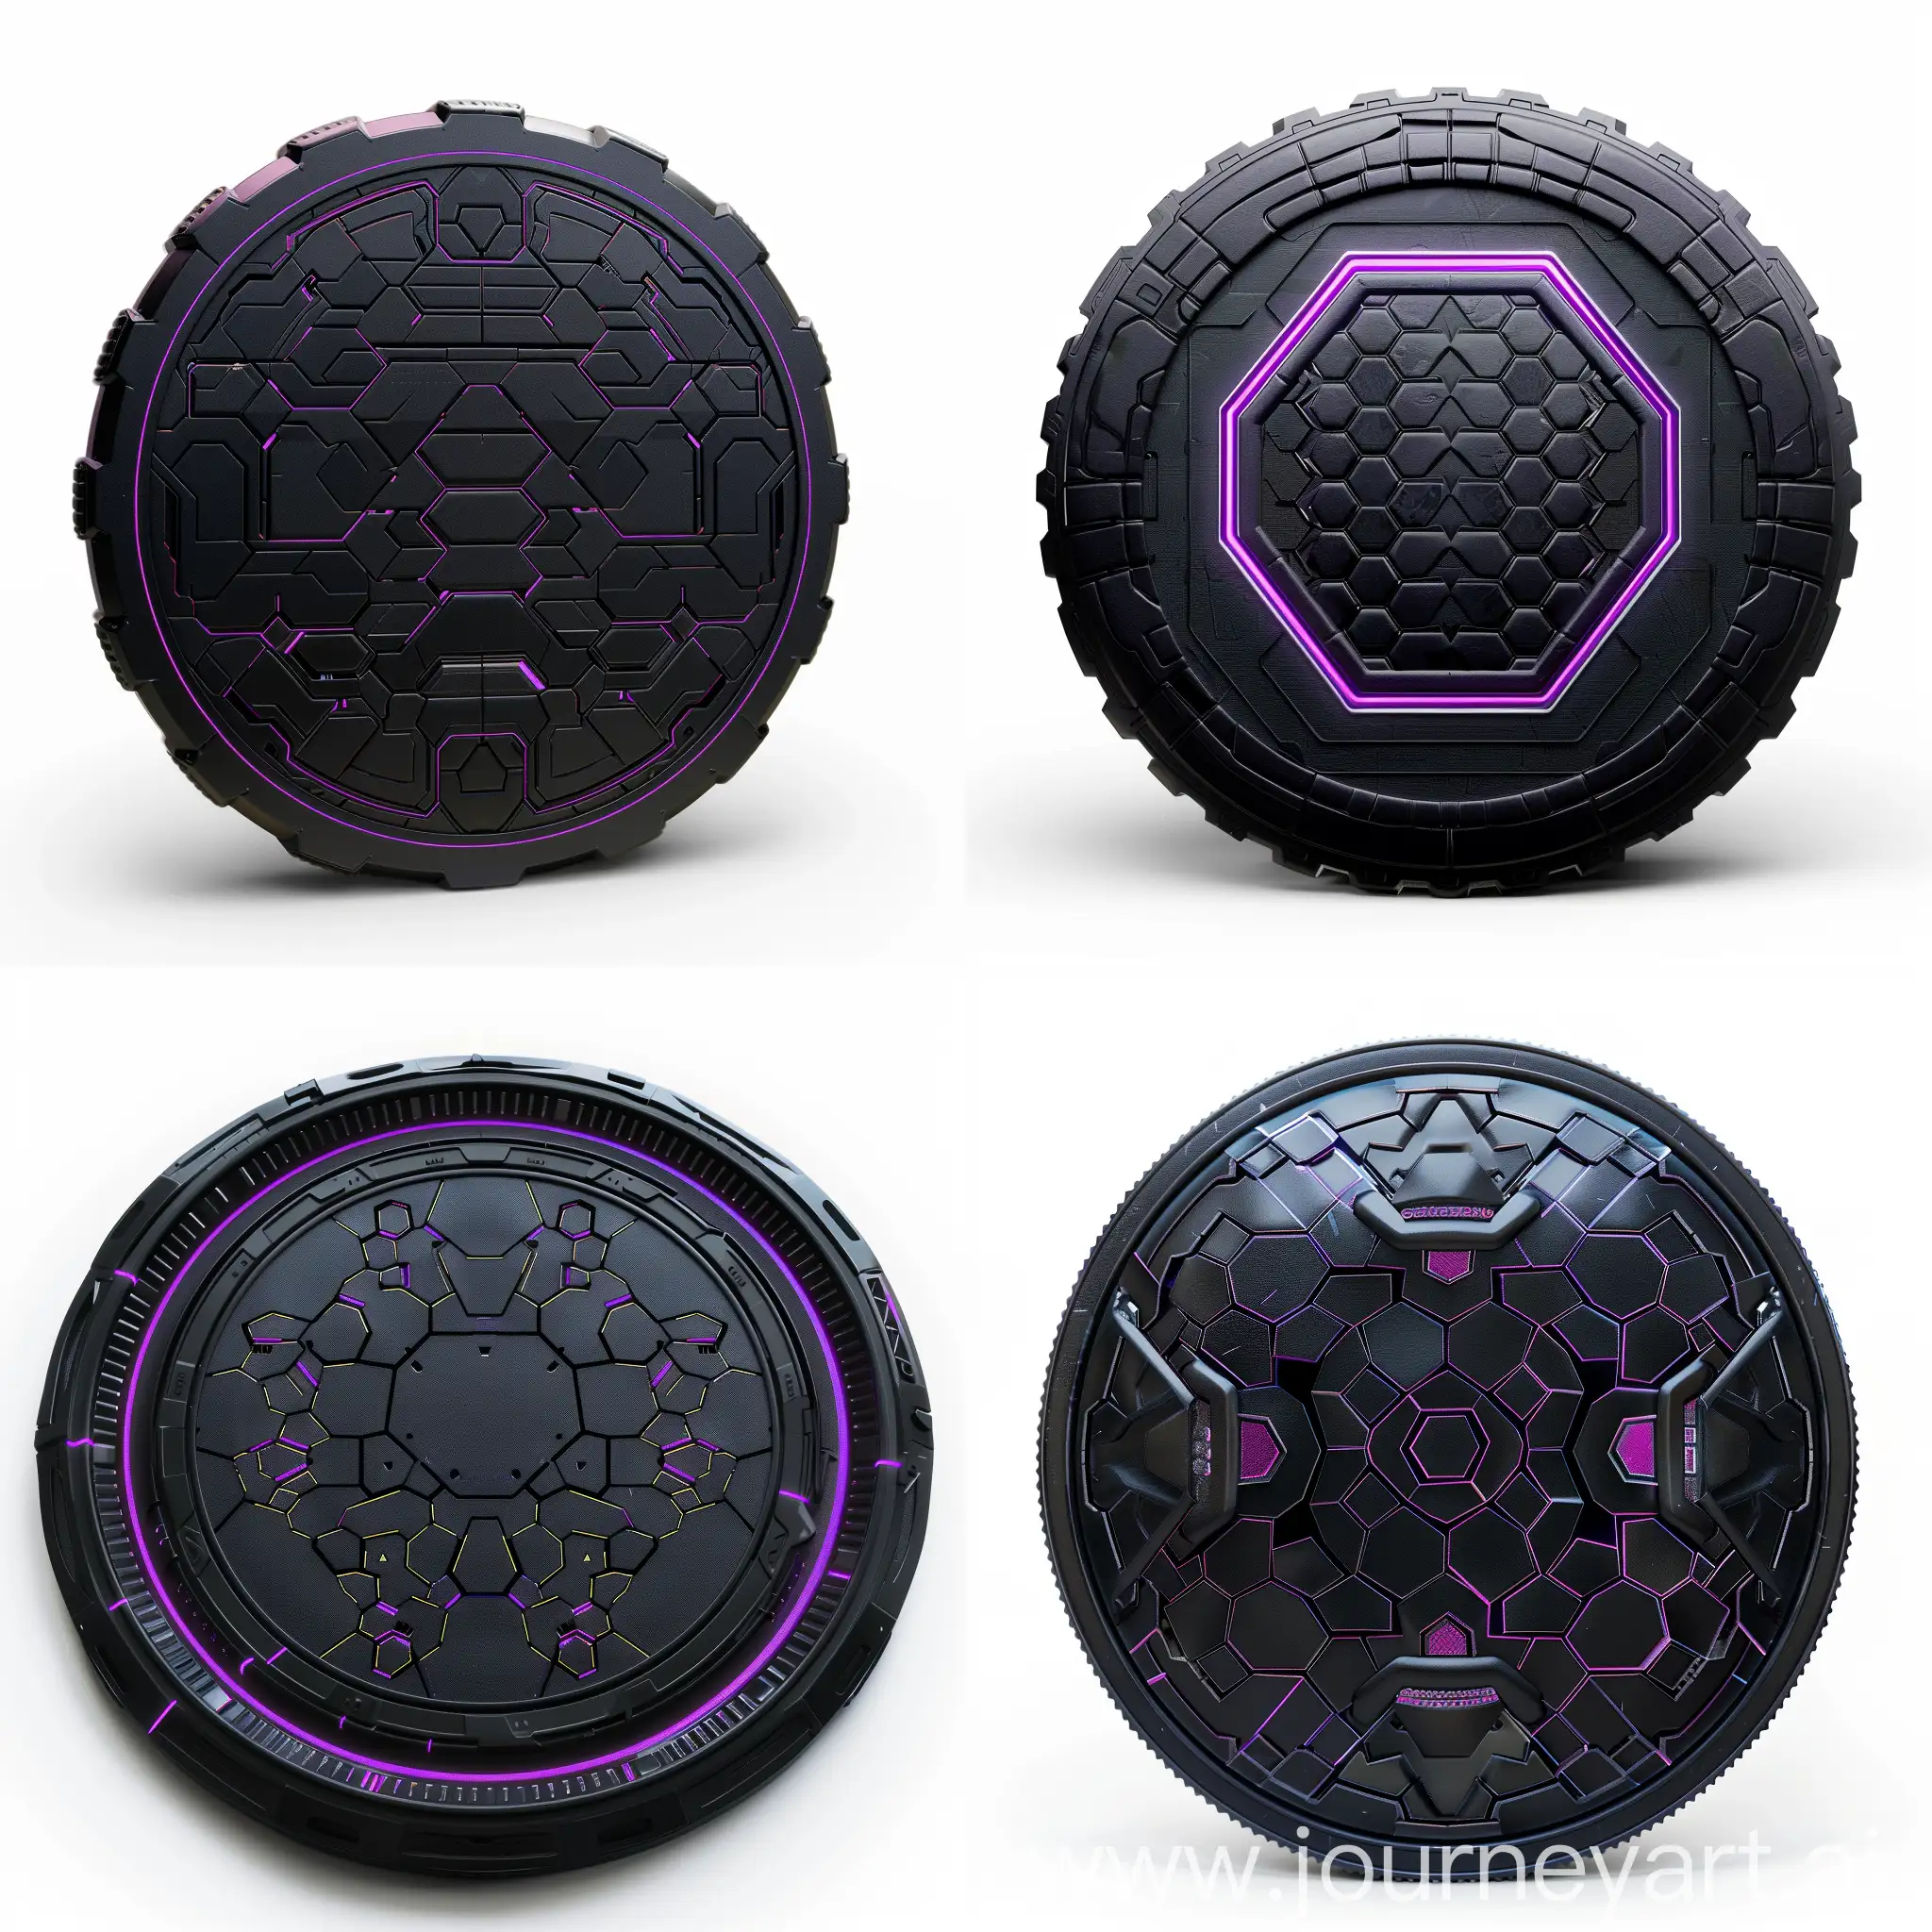 Cyberpunk-Robotic-Coin-with-Neon-Purple-Hexagon-Patterns-on-Clean-White-Background